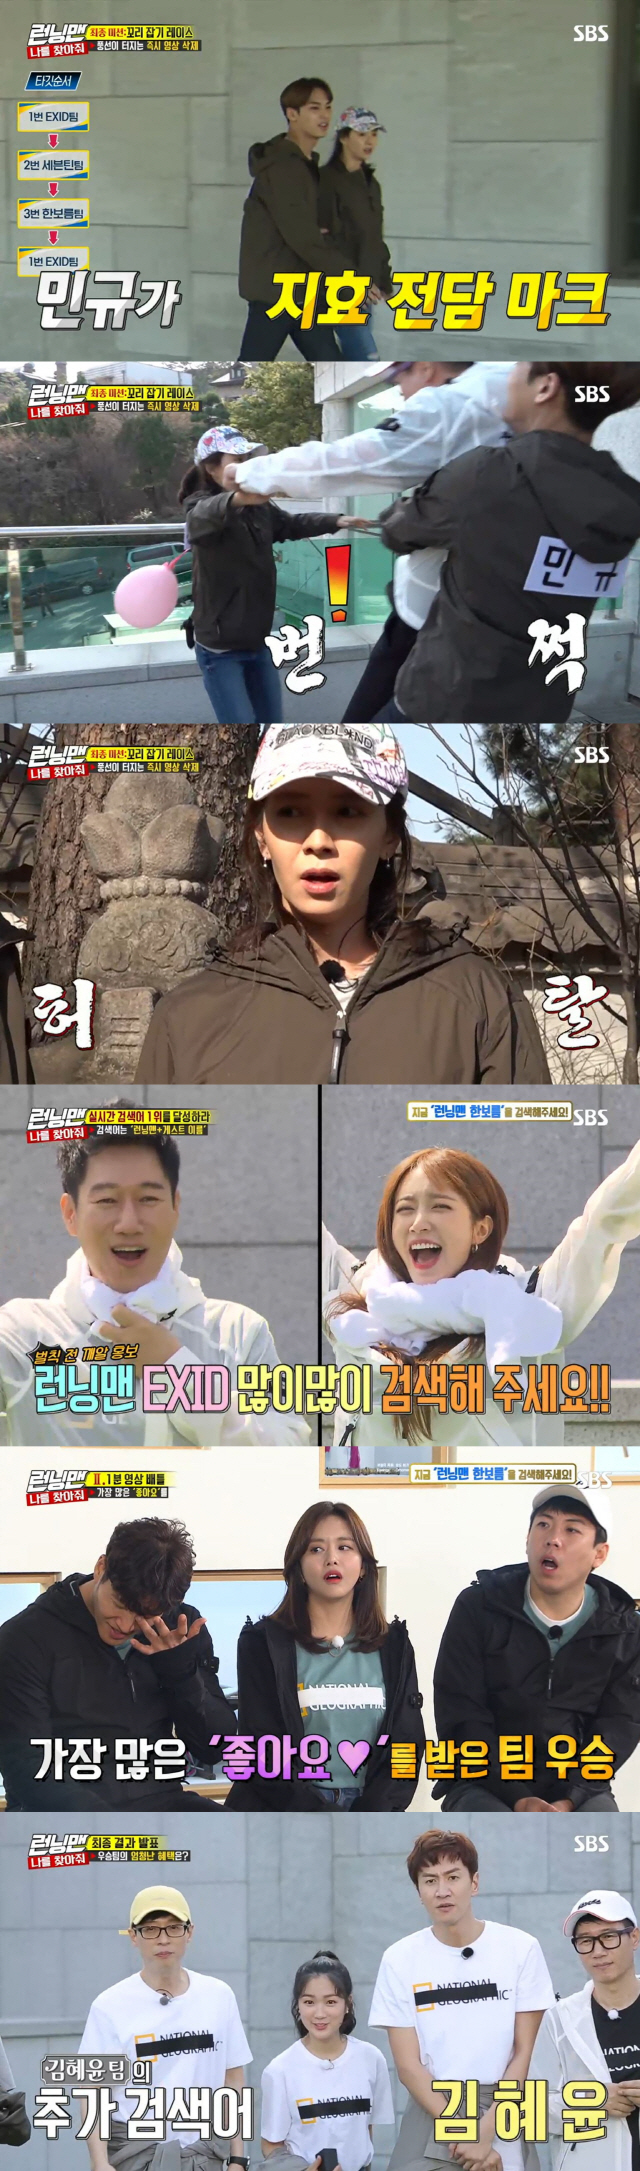 Seventeen Mingyu and Ace Song Ji-hyo became Running Man and Best 1 minute protagonist.On this day, Seventeens victory and Mingyu, EXIDs Hani and Solji, actor Kim Hye-yoon, and actor Han Bo-reum appeared as guests and played the first real-time search word war.Seventeen teamed up with Song Ji-hyo and Jeon So-min, Kim Hye-yoon teamed up with Yoo Jae-Suk and Kwangsoo, and Han Bo-reum teamed up with Kim Jong-kook and Yang Se-chan.EXID was in a boat with Ji Suk-jin and Haha; they had to go through three rounds in total to achieve the top spot in real-time search terms before starting the game that won.The first round was the number one chart of those days. The last team was baptized with water bombs, with the number one game on the popular song chart from 1993 to 2018.Kim Hye-yoon went on a quiz with his dance skills hidden to avoid water bombs.However, Yoo Jae-Suk and Kwangsoo laughed at Kim Hye-yoon, saying, I should not have told you if I could not, and I thought I was doing well.At the end of the battle, the Han Bo-reum team became the winner of the chart of those days and benefited from the Running Man Han Bo-reum phrase at the top of the screen.The second team was the Seventeen team, the third team was the Kim Hye-yoon team, and the water cannon penalty went to the last EXID team.The second round was a battle in which the team that produced a one-minute promotional video for each team won the most likes on the Running Man official SNS.Kim Hye-yoons team has featured a variety of elements that attract the attention of netizens, from Jennys Solo choreography to the performance of the example in Skycastle.The EXID team produced direct-cam videos featuring choreography and anti-war fun tailored to Hot Pink, and the Seventeen team challenged the Onana dance.The Han Bo-reum team used Kim Jong-kooks golden connections to capture the instant phone connections with the best stars from Jackson to Ryu Hyun-jin of GOT7.Finally, the tail-catching race started when the promotional video was deleted, and the promotional video posted on the SNS was deleted as soon as the balloon of the tail bursts, and the number of likes will be finished.Kim Hye-yoons team was the first to be eliminated by the Han Bo-reum team after the balloon was removed.Song Ji-hyo, left alone, was in Danger where the balloon would burst with the appearance of Ji Suk-jin, but with the help of Seventeen Mingyu, he escaped Danger.However, Haha joined the team and went to catch Song Ji-hyo, and the two teams played front.Mingyu defended Song Ji-hyo by blocking Ji Suk-jin and Haha, but Song Ji-hyos balloon was caught in the branches and was dropped.The scene recorded the highest audience rating of 7.1% per minute, accounting for the best one minute.The final winner of the tail-catching race was won by the Han Bo-reum team.However, Kim Hye-yoon teams video, which was first deleted due to the first elimination of tail-catching, won the highest number of likes of 23061.The winning Kim Hye-yoon team provided another search word in addition to Running Man Kim Hye-yoon.The final winner will be determined by counting real-time search terms until midnight.